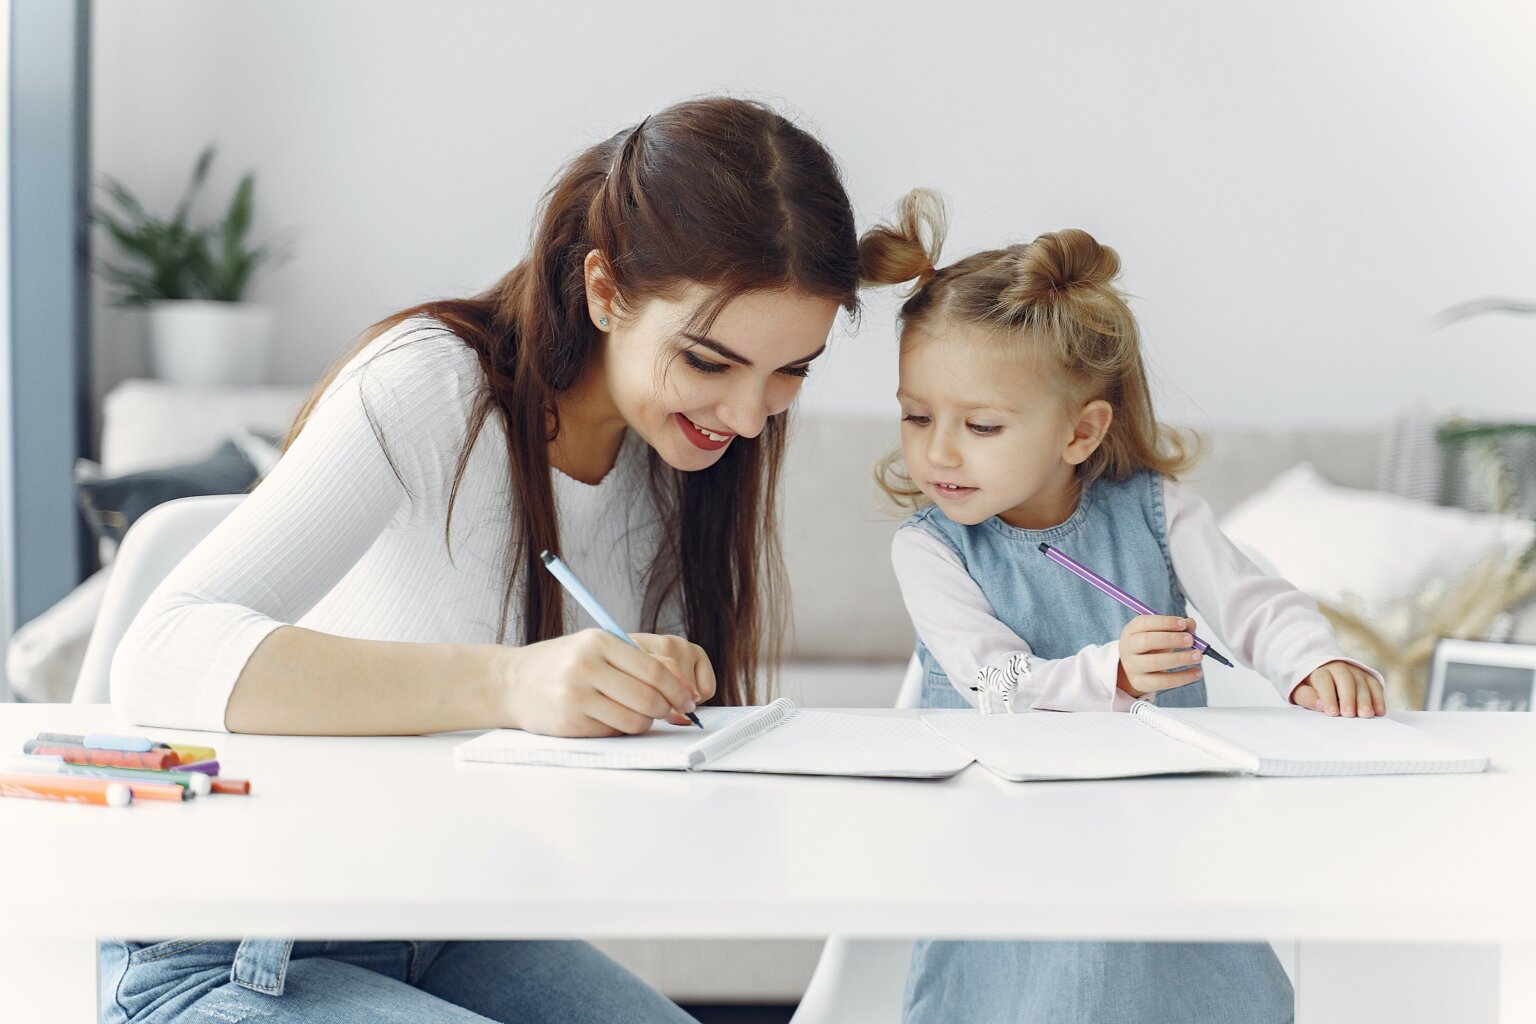 A mom teaching her daughter at a desk while they both write in notebooks.